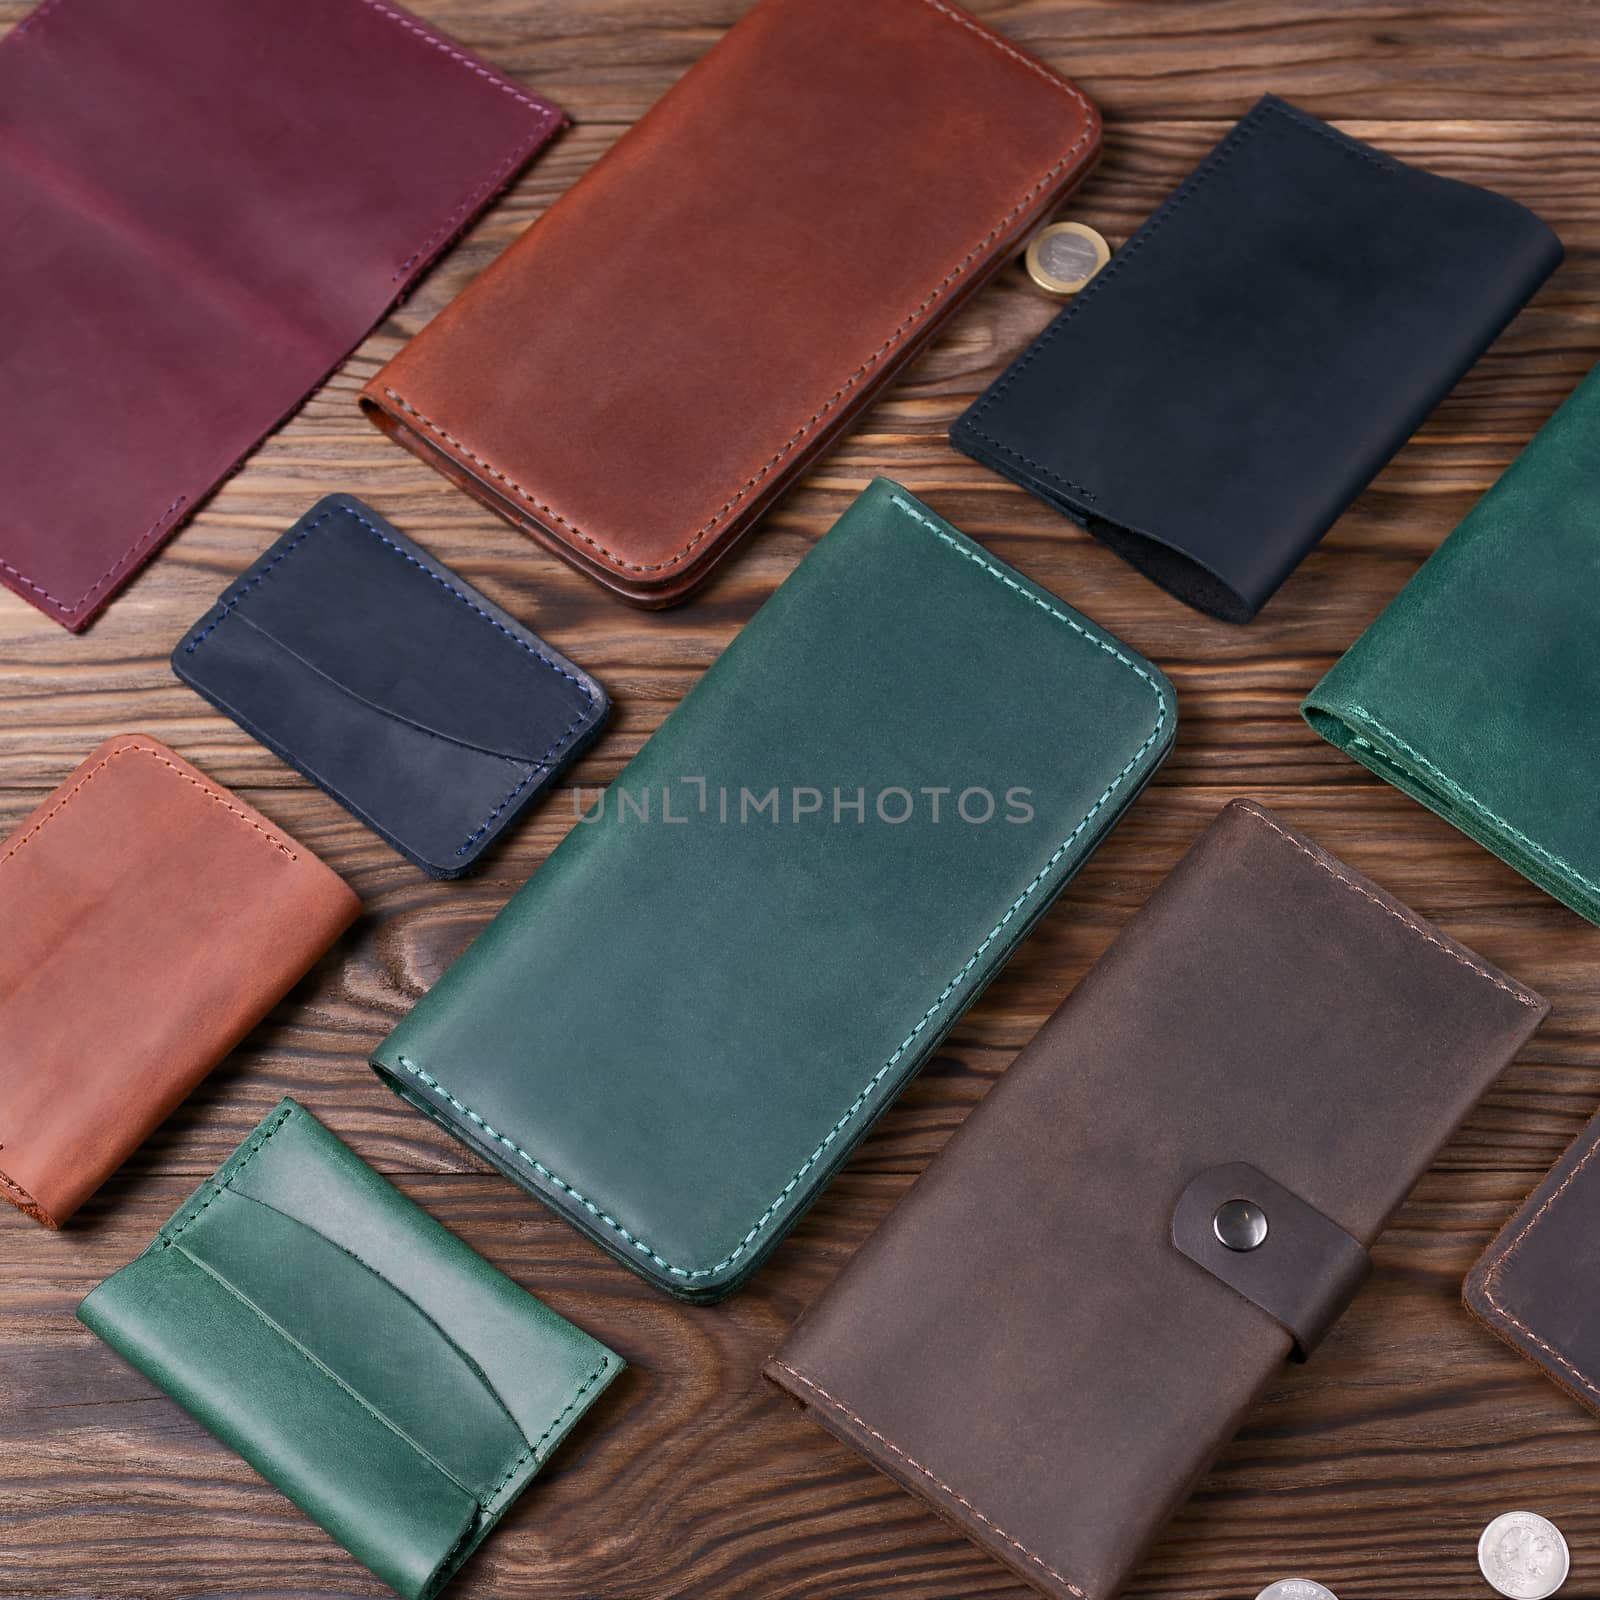 Green color handmade leather porte-monnaie surrounded by other leather accessories on wooden textured background.  Side view. Stock photo of luxury accessories. by alexsdriver